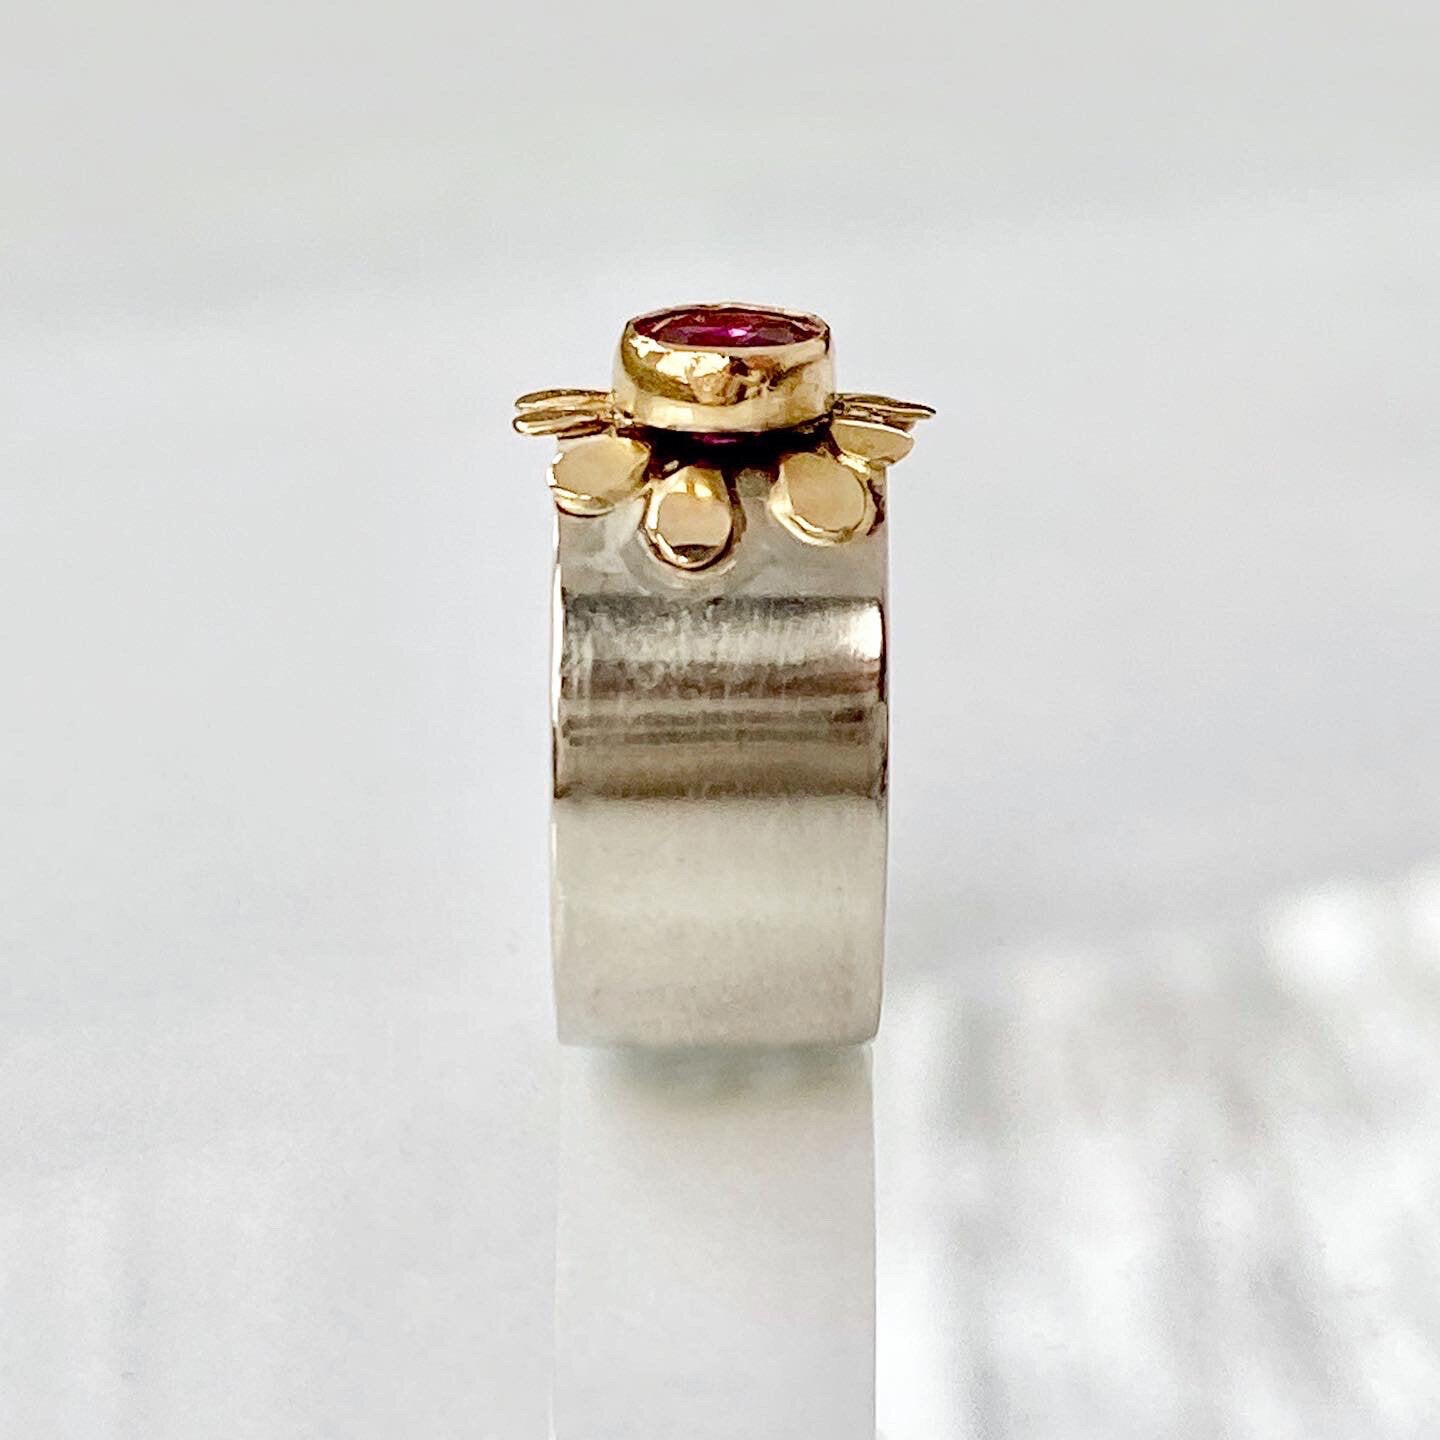 14K Ruby Ring, Untreated Ruby Flower Ring, White Gold, One of a Kind